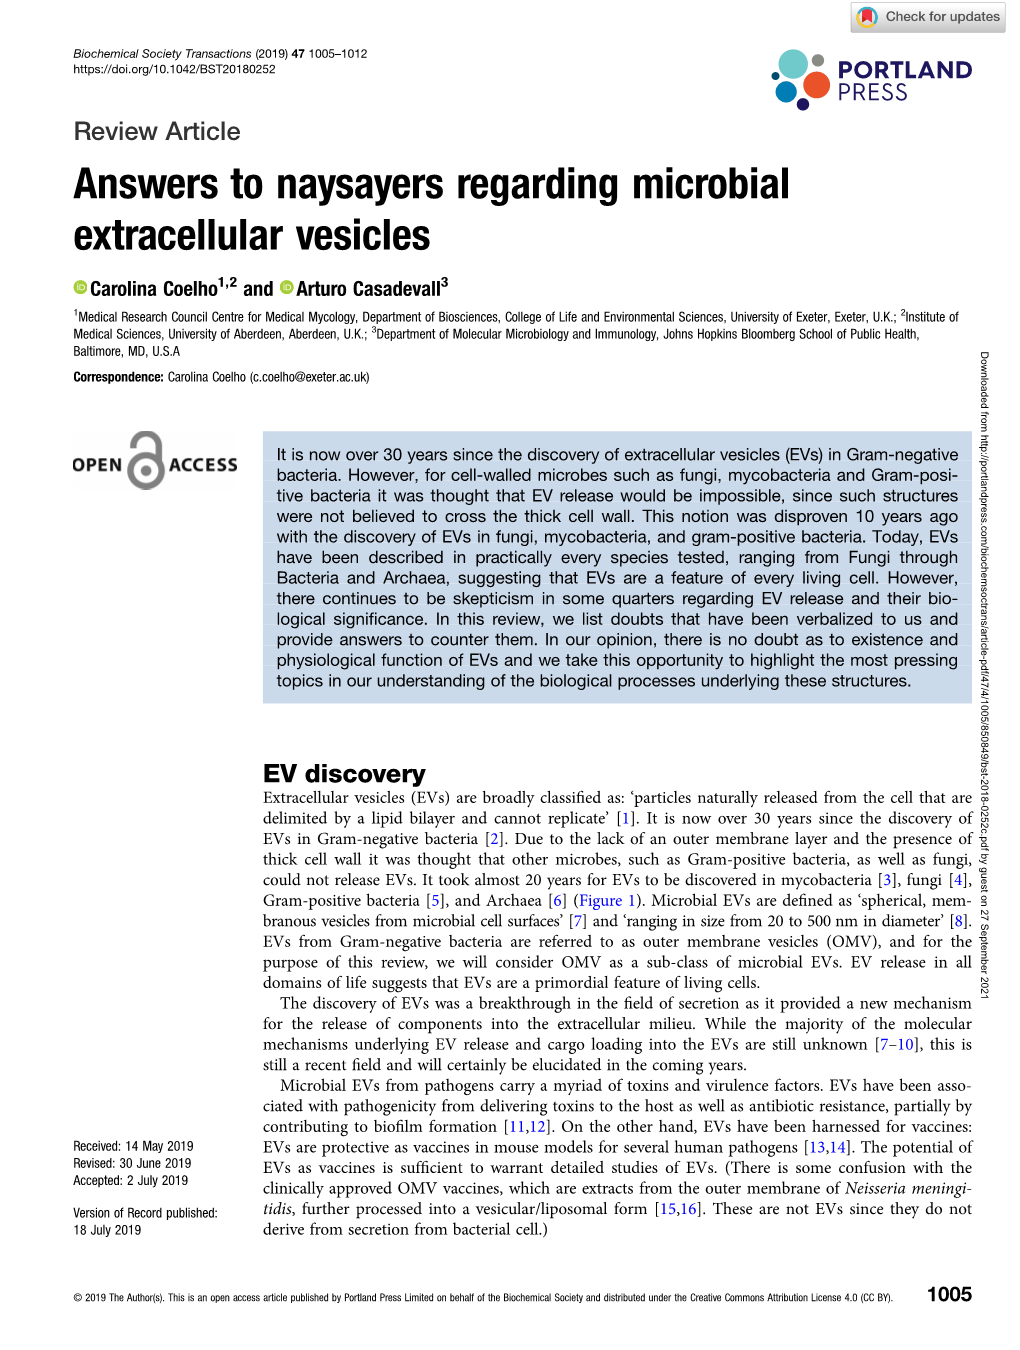 Answers to Naysayers Regarding Microbial Extracellular Vesicles